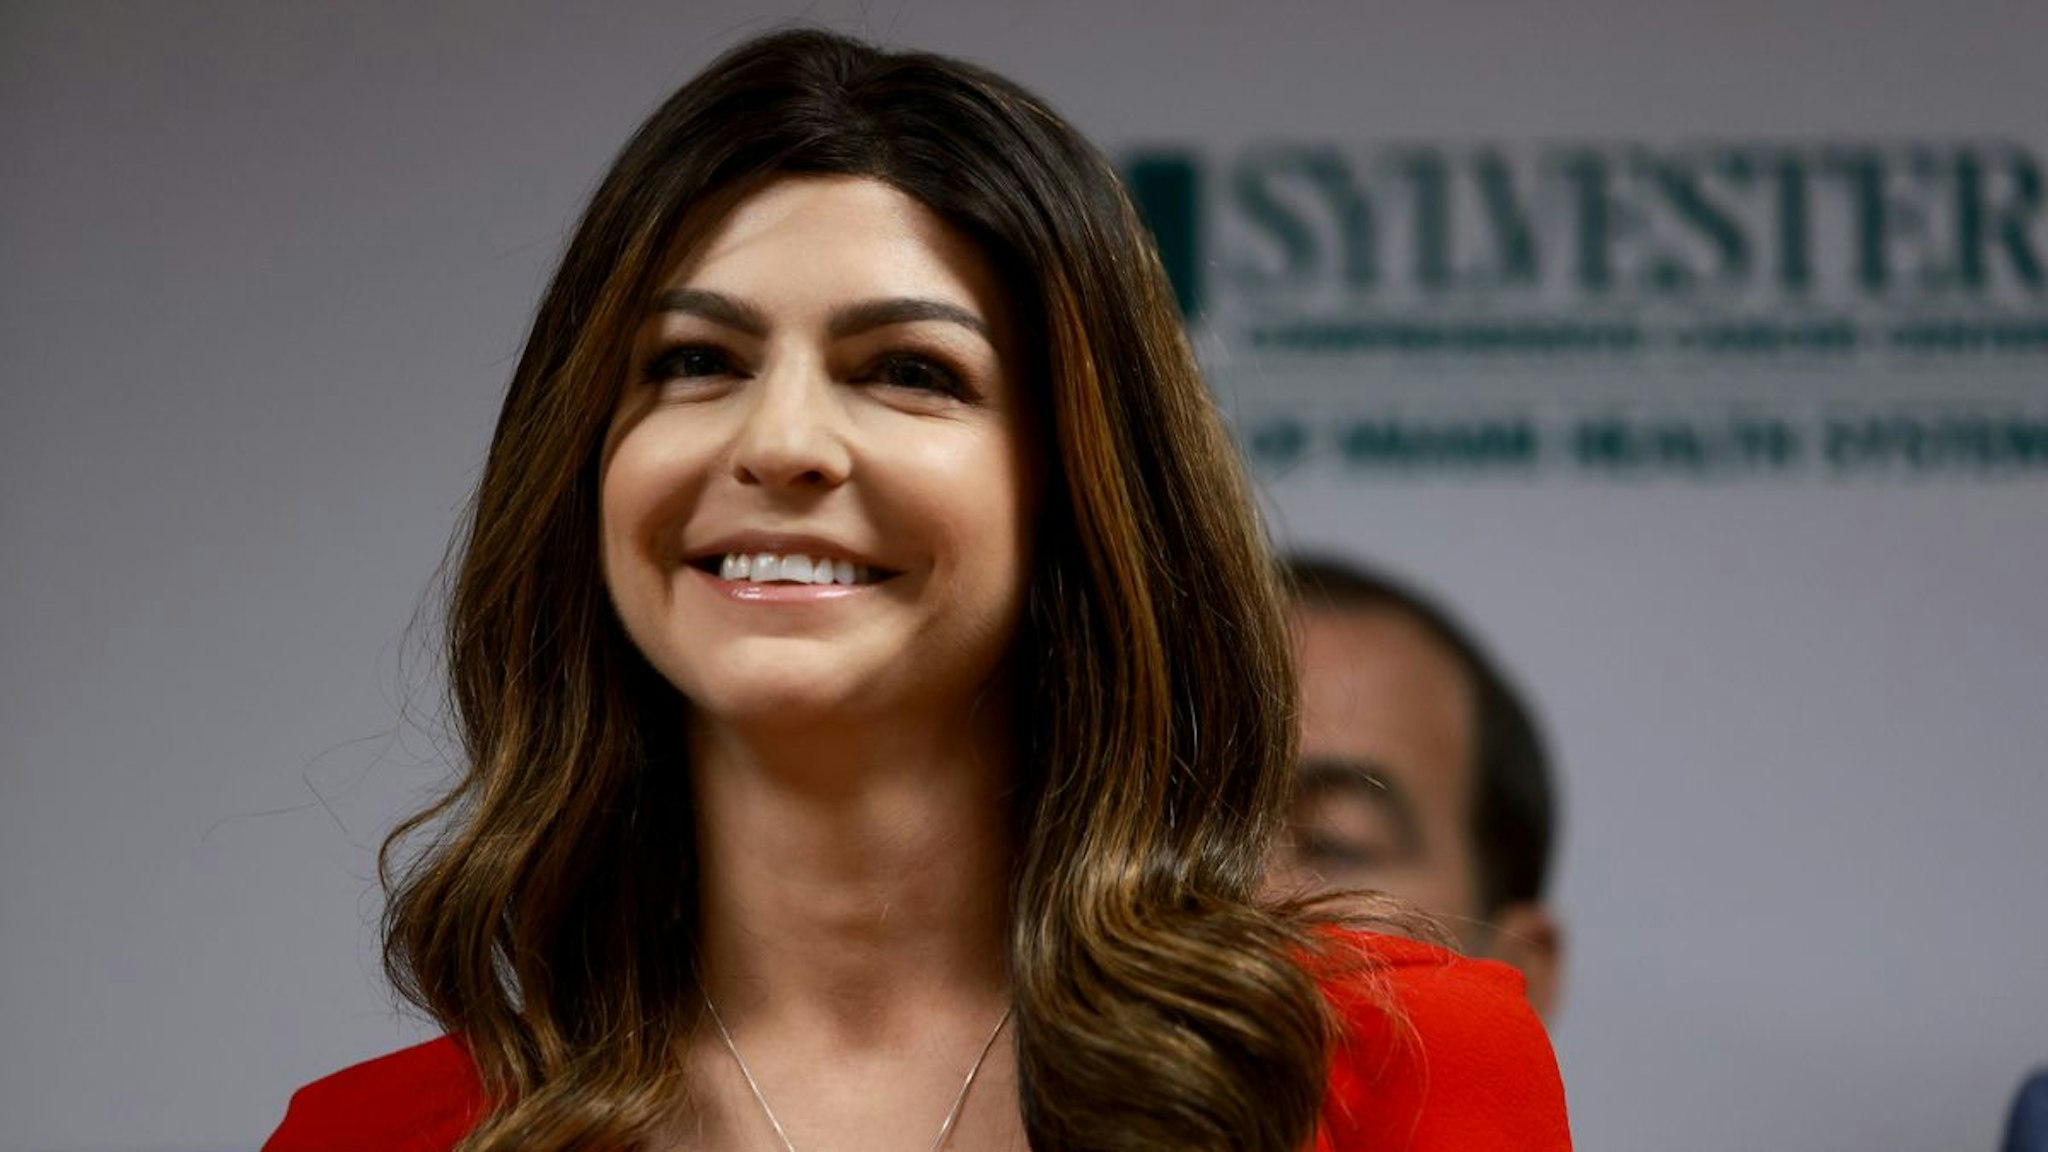 First lady Casey DeSantis, who recently survived breast cancer, listens as her husband Florida Gov. Ron DeSantis speaks during a press conference at the University of Miami Health System Don Soffer Clinical Research Center on May 17, 2022 in Miami, Florida.